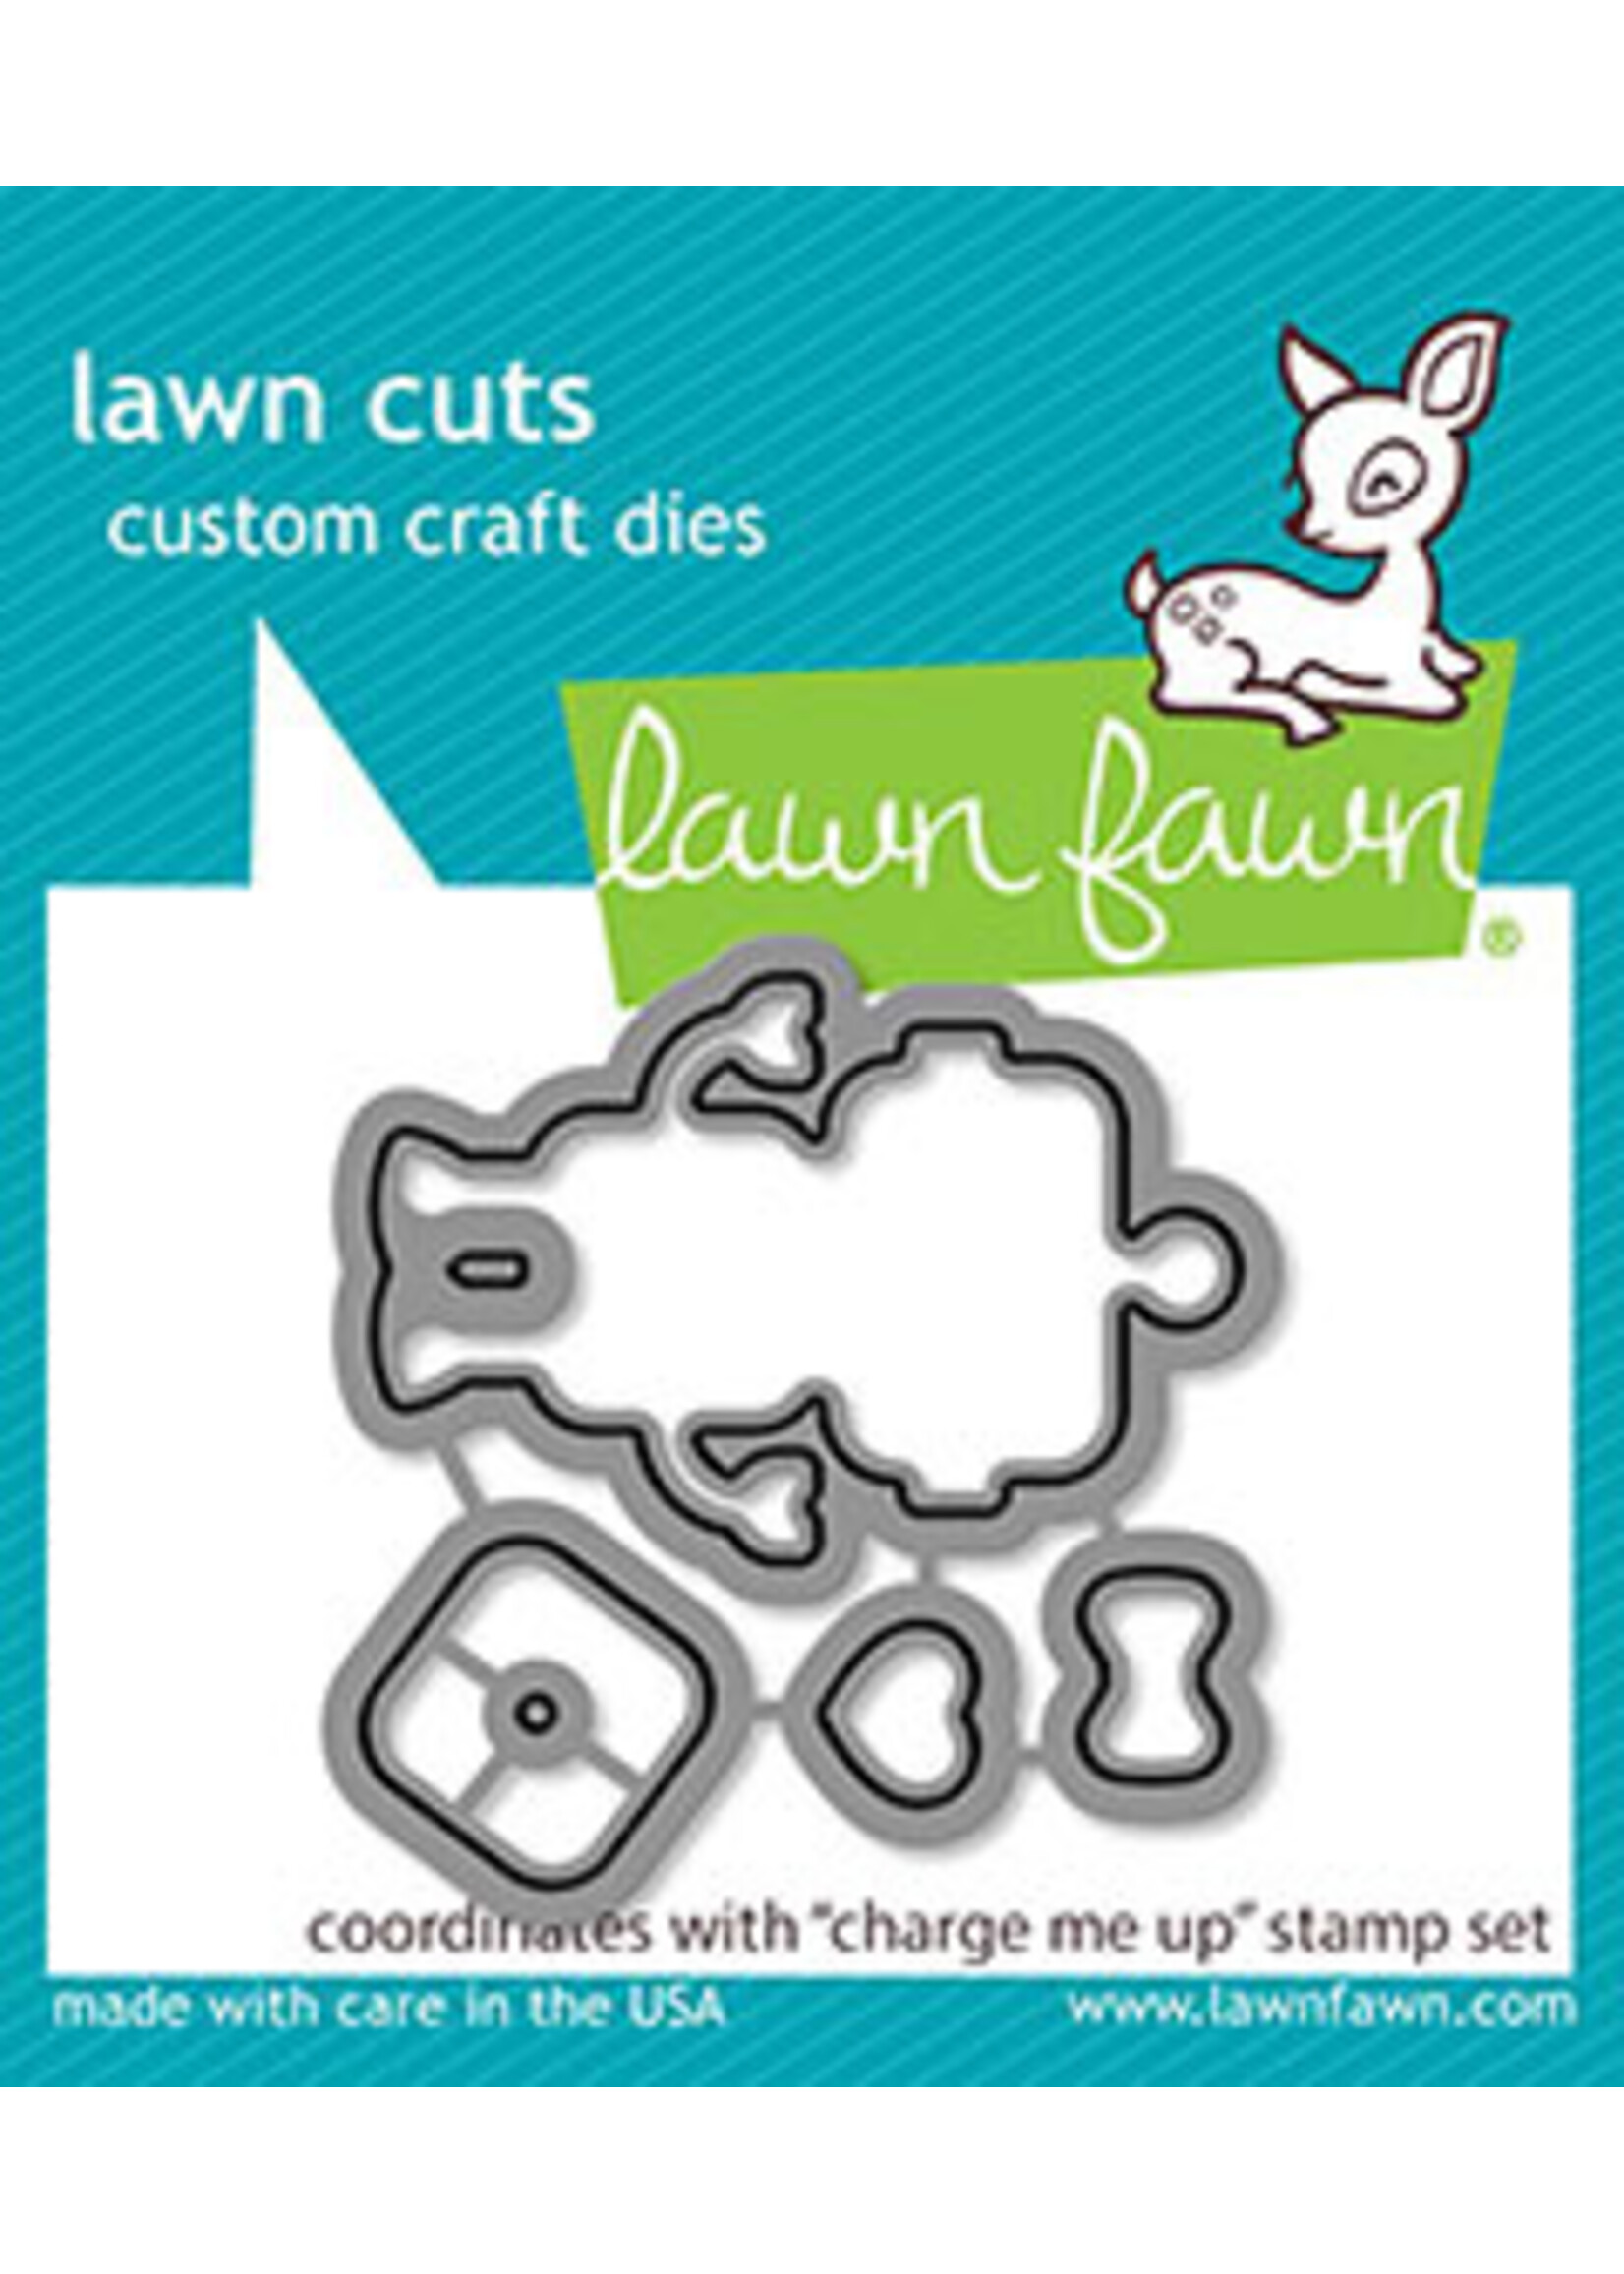 Lawn Fawn charge me up  - lawn cuts Die